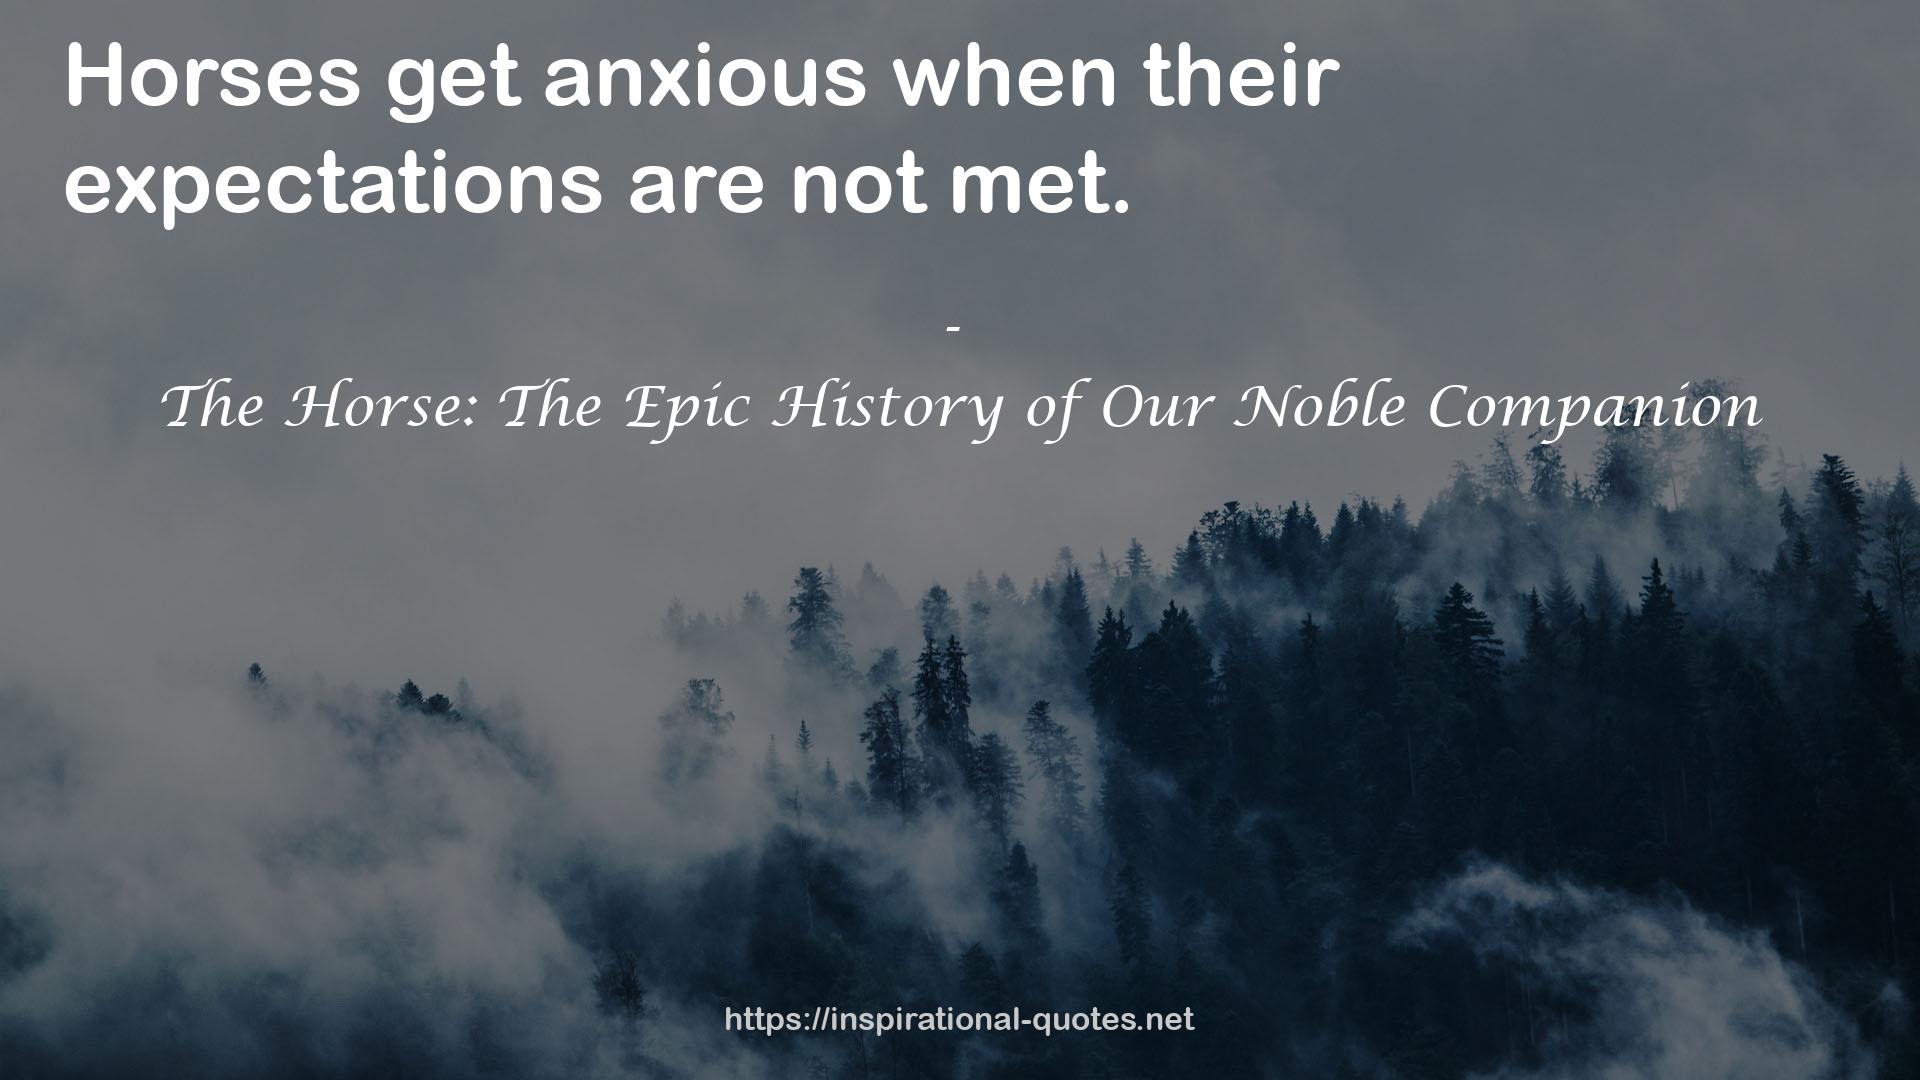 The Horse: The Epic History of Our Noble Companion QUOTES